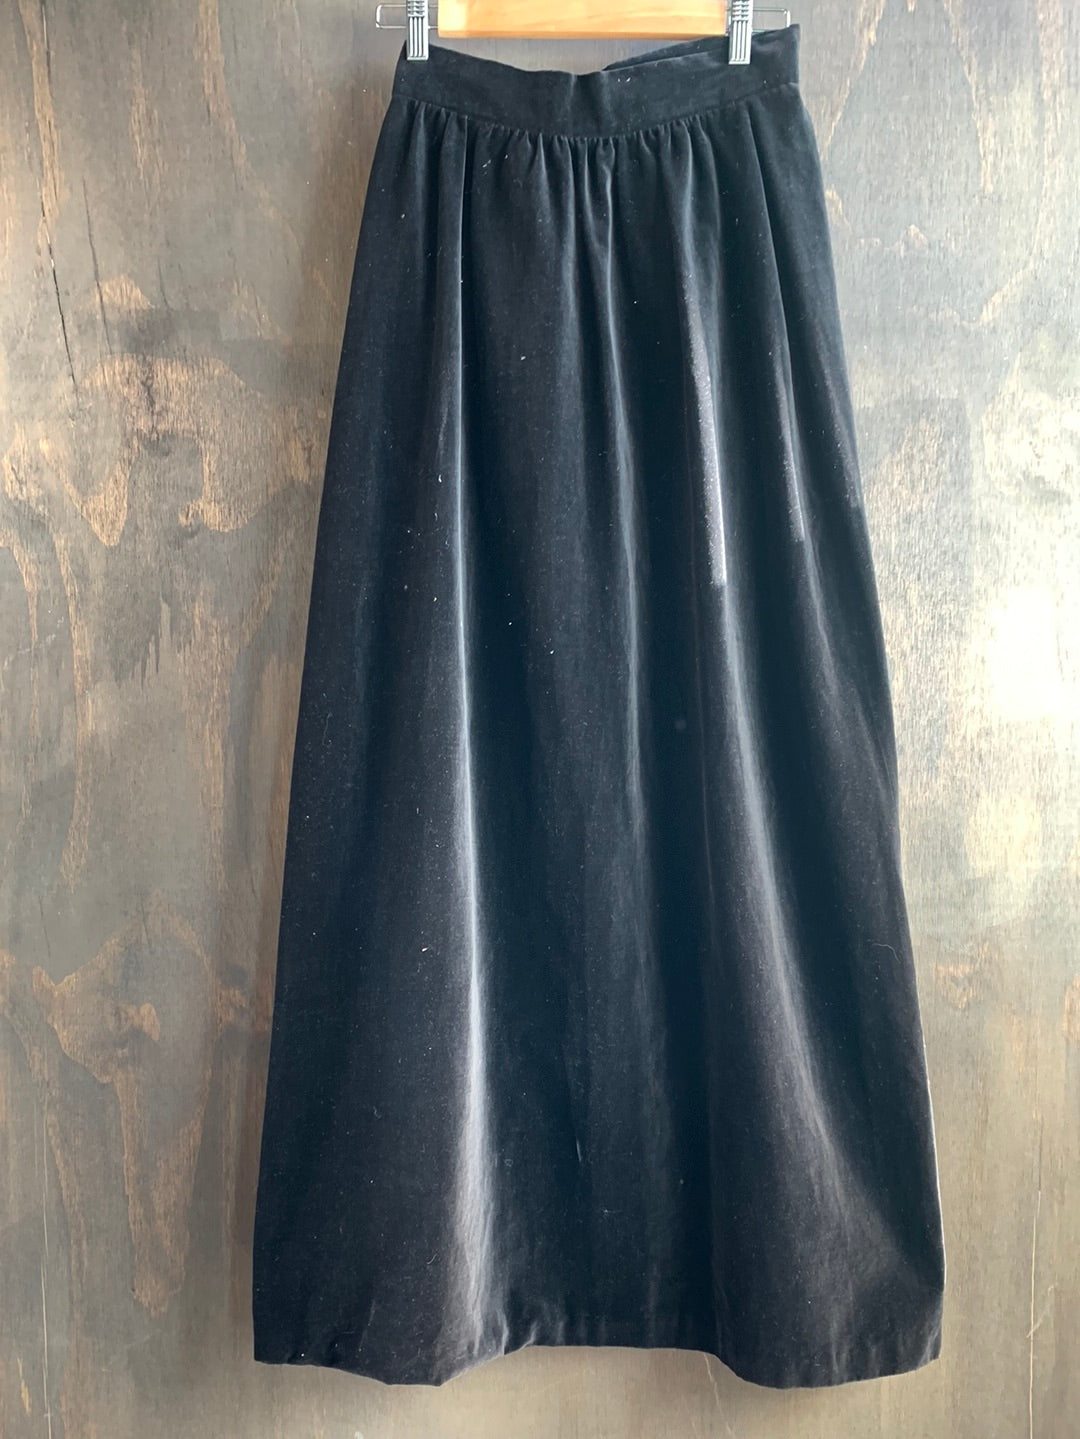 Embroidered Velvet “This Aint My First Rodeo" Maxi Skirt